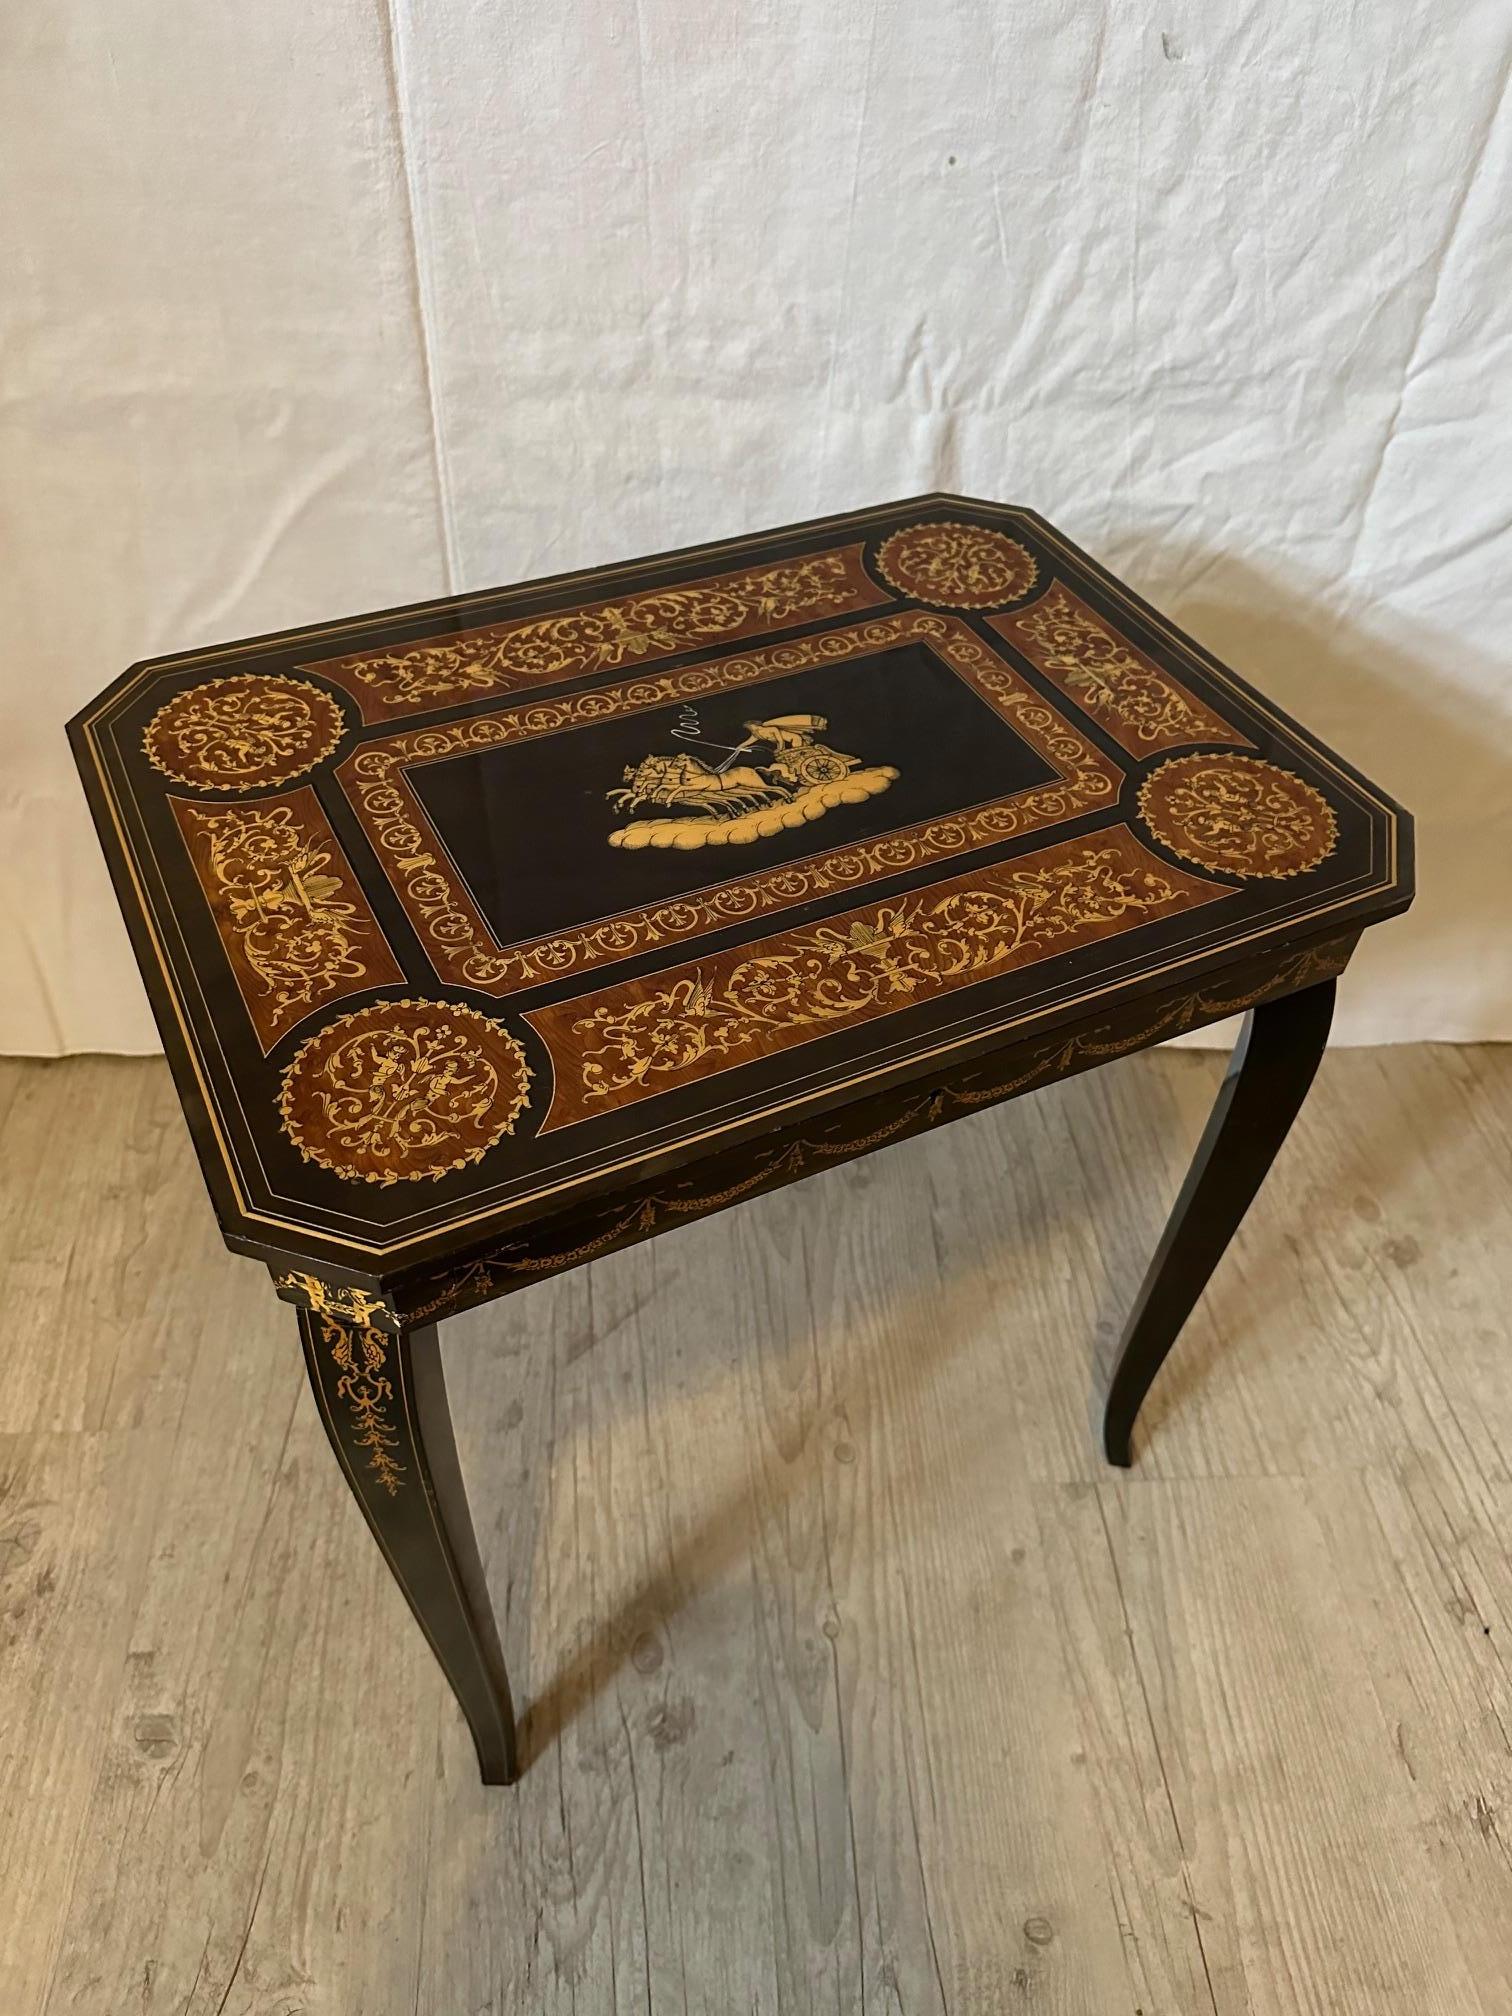 Very nice musical side table dating from the Napoleon III period in good condition.
Decorated with scrolls and horse-drawn chariot in the center.
The top opens and you can discover several compartments.
Below there is a small key which, when turned,